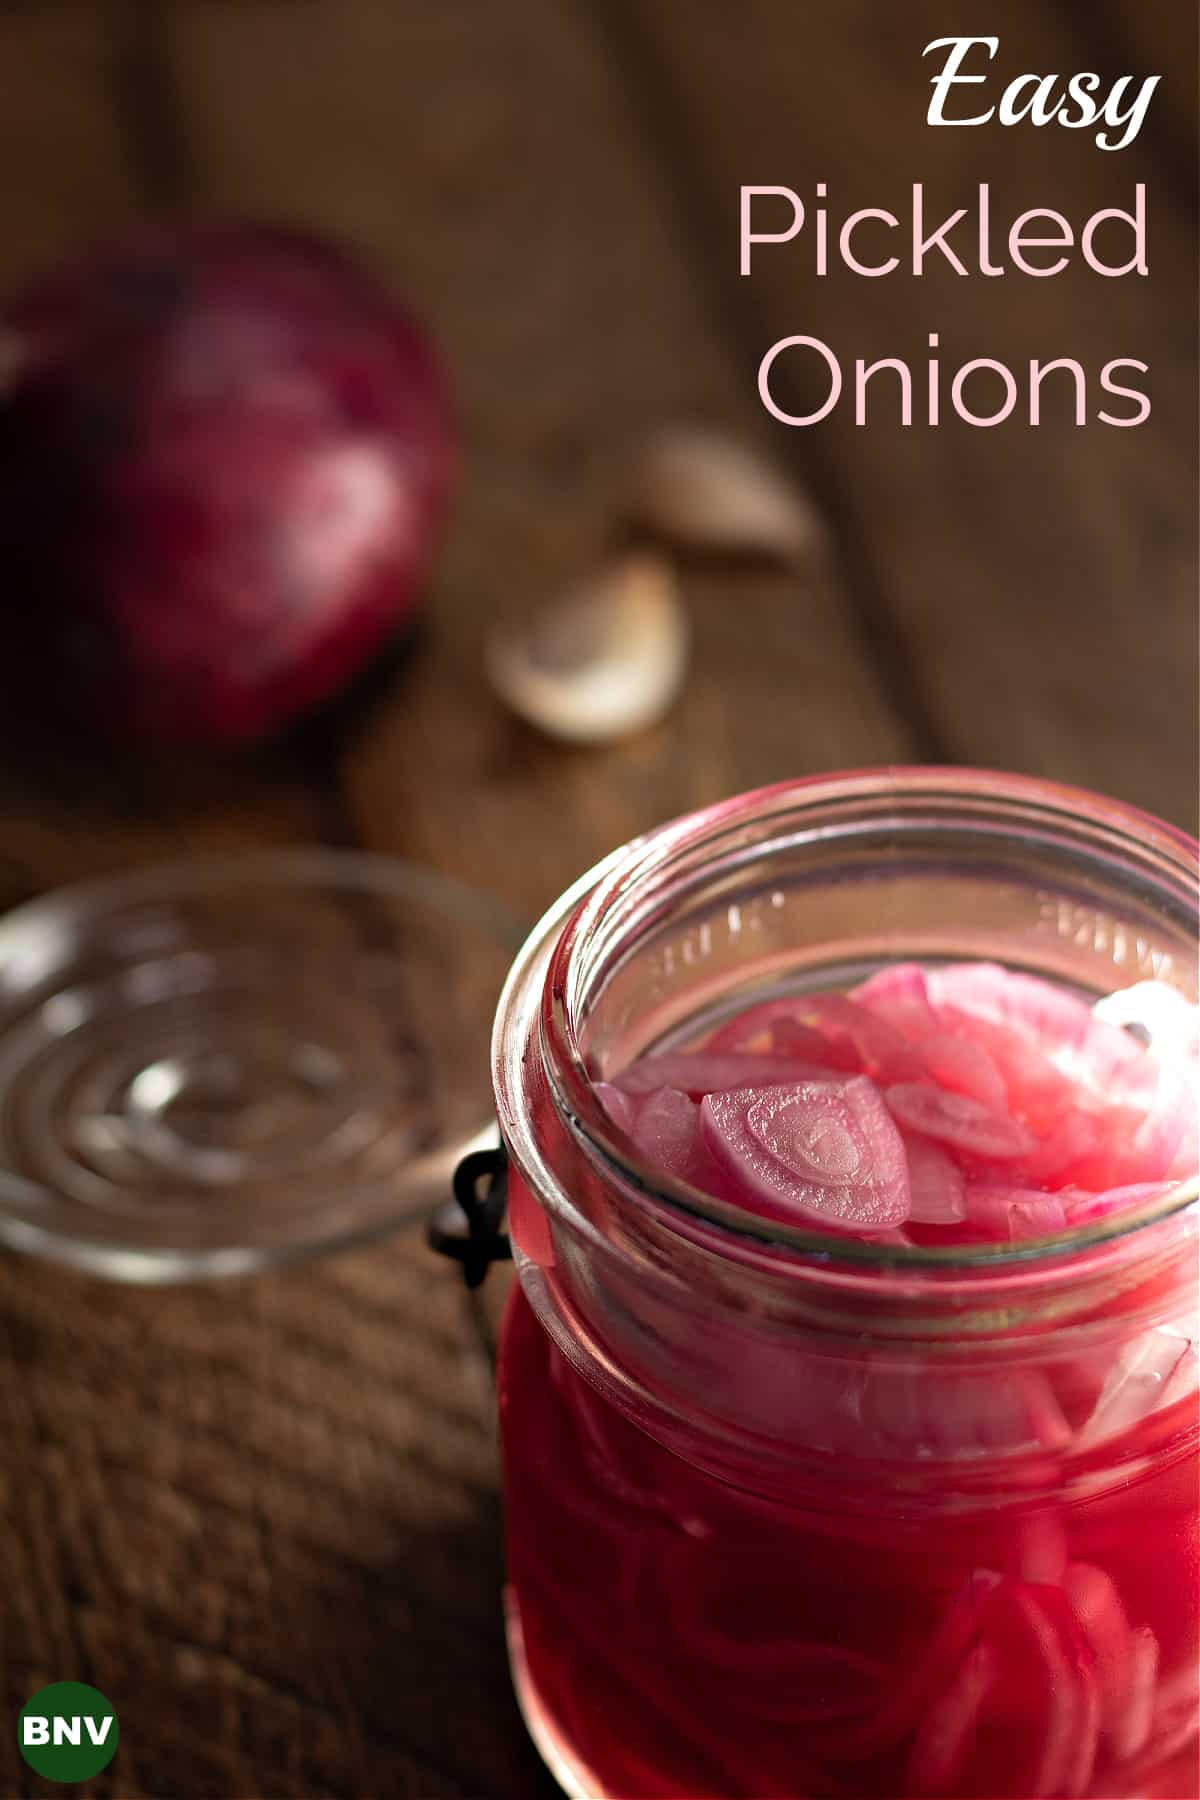 a jar of pickled onions